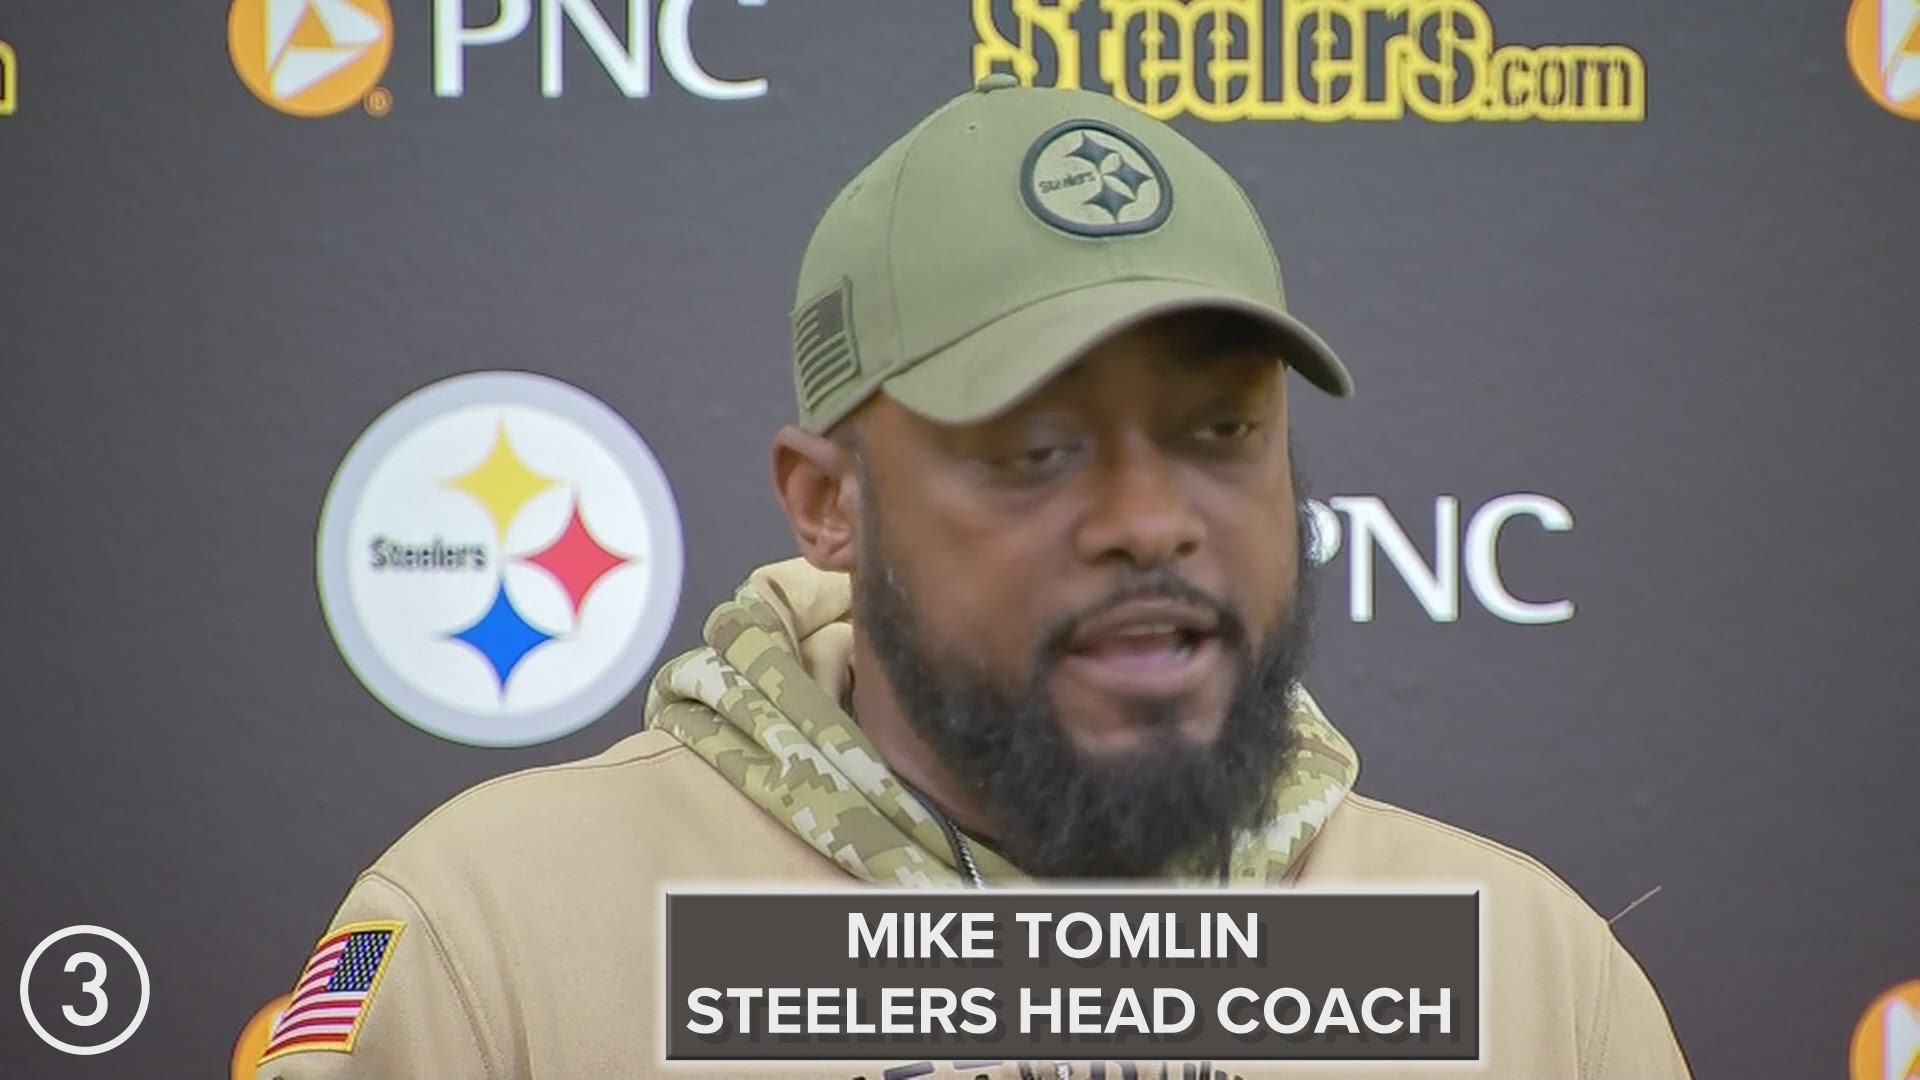 Speaking to reporters on Tuesday, Pittsburgh Steelers head coach Mike Tomlin denied that his team initiated a fight with Myles Garrett.  Garrett's hearing is on Wed.